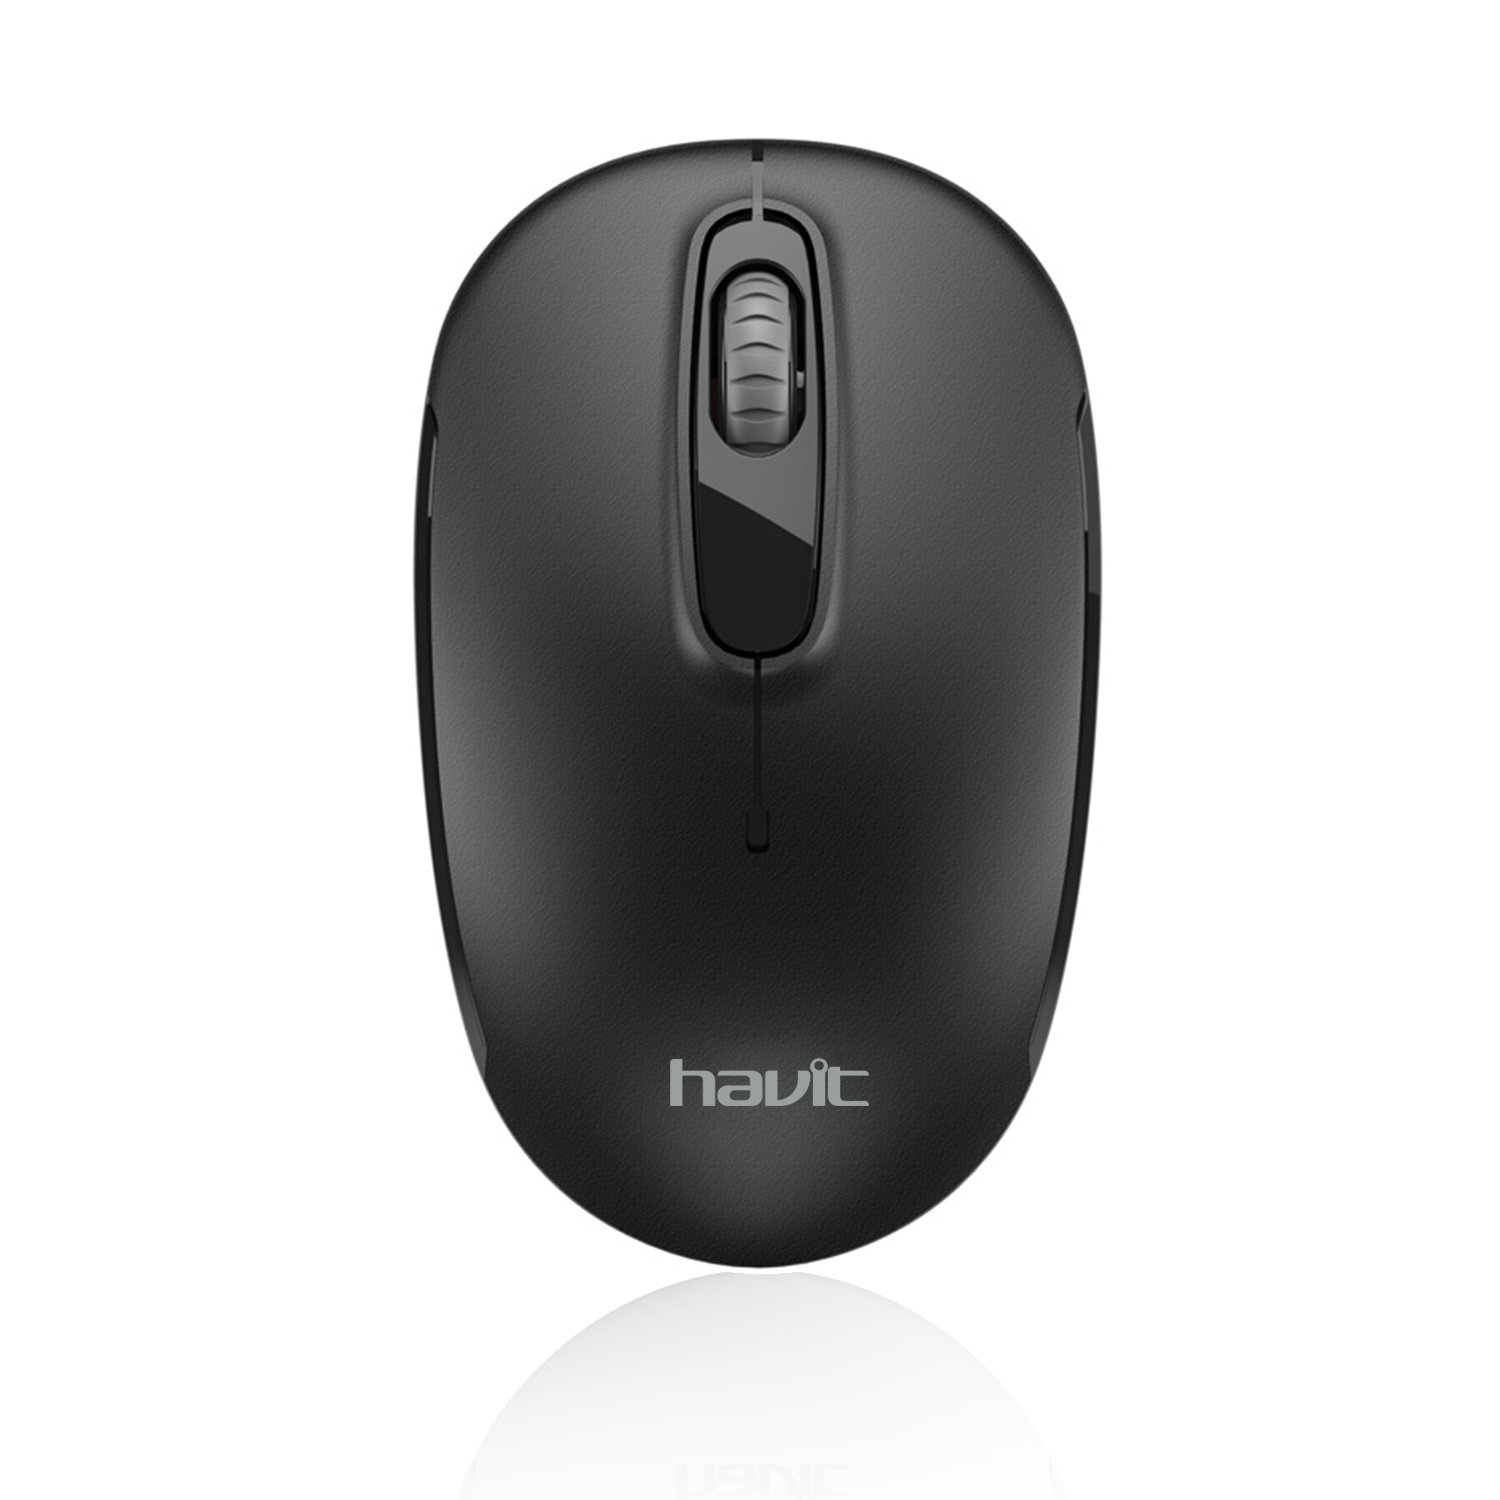 HAVIT HV-MS958GT 2.4G Wireless Mouse with 15m Range (Black) at Rs 298 only